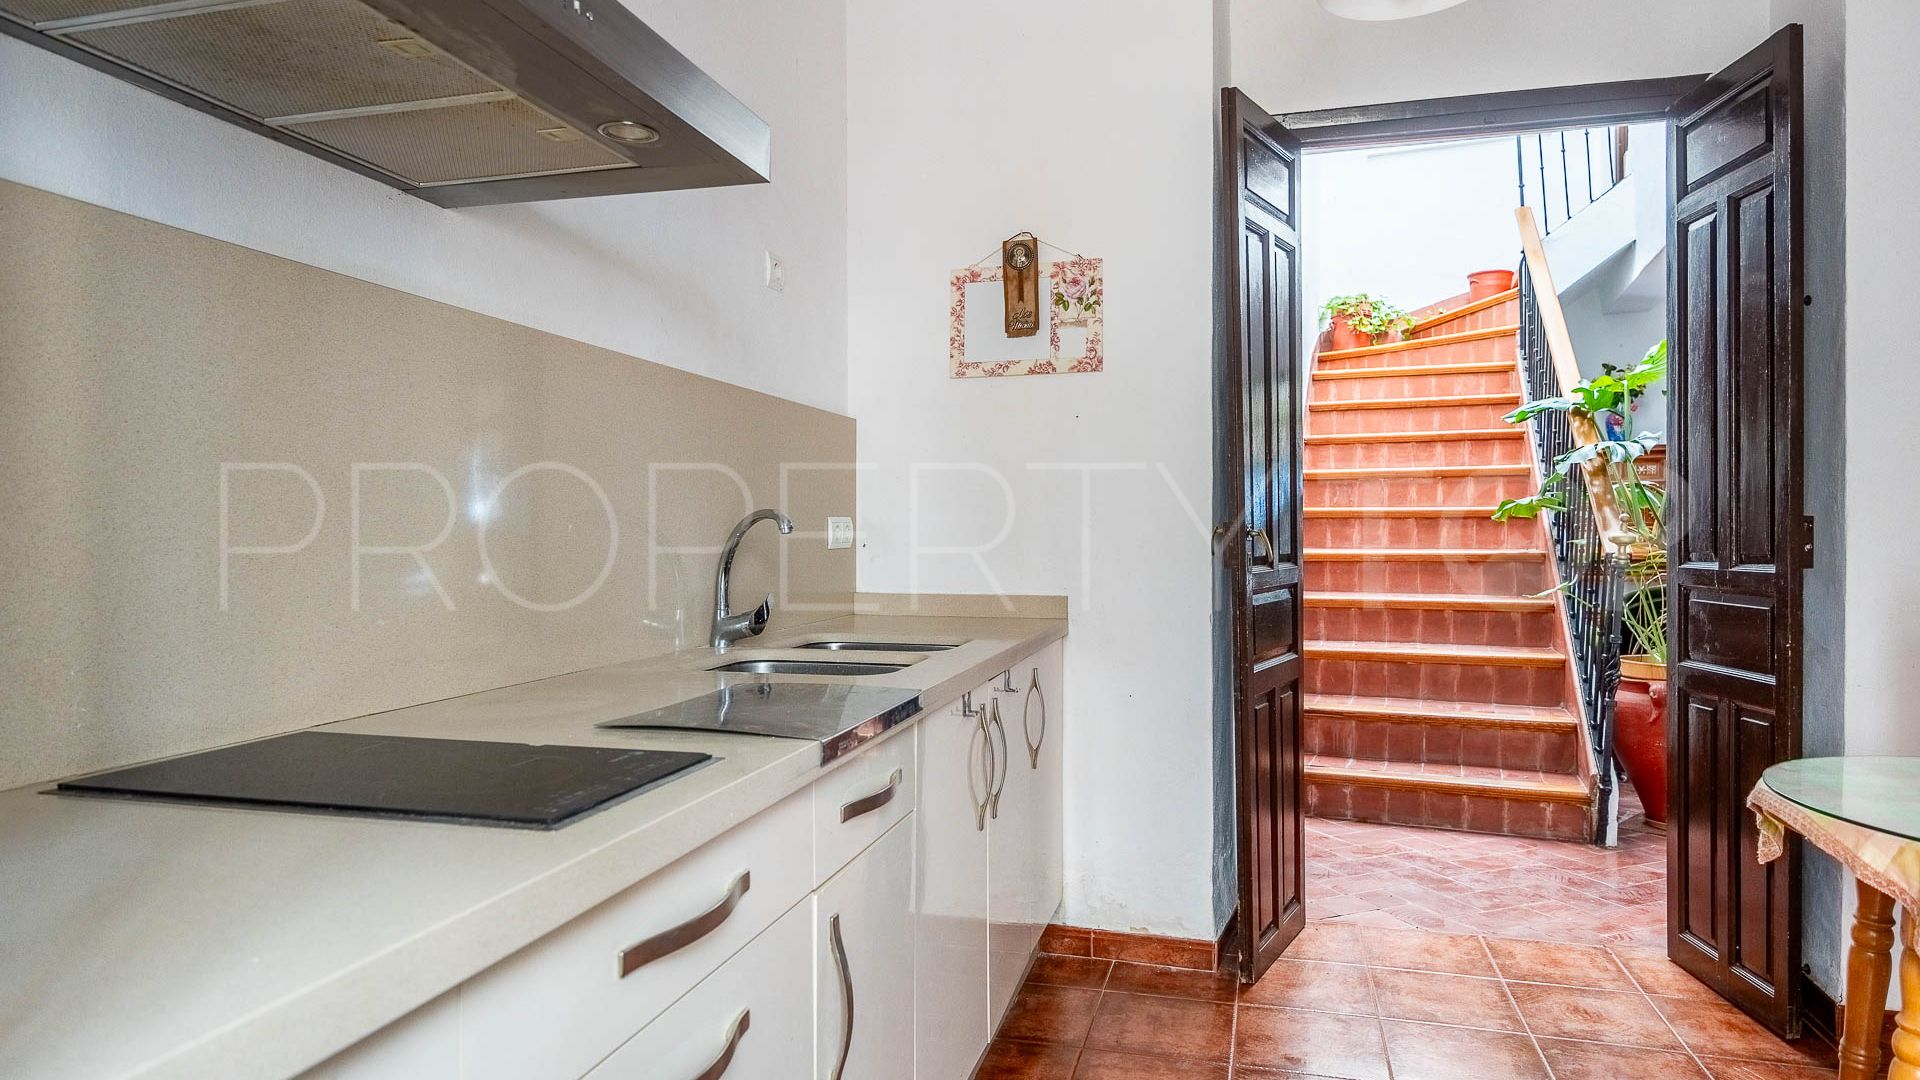 4 bedrooms Ronda Centro town house for sale